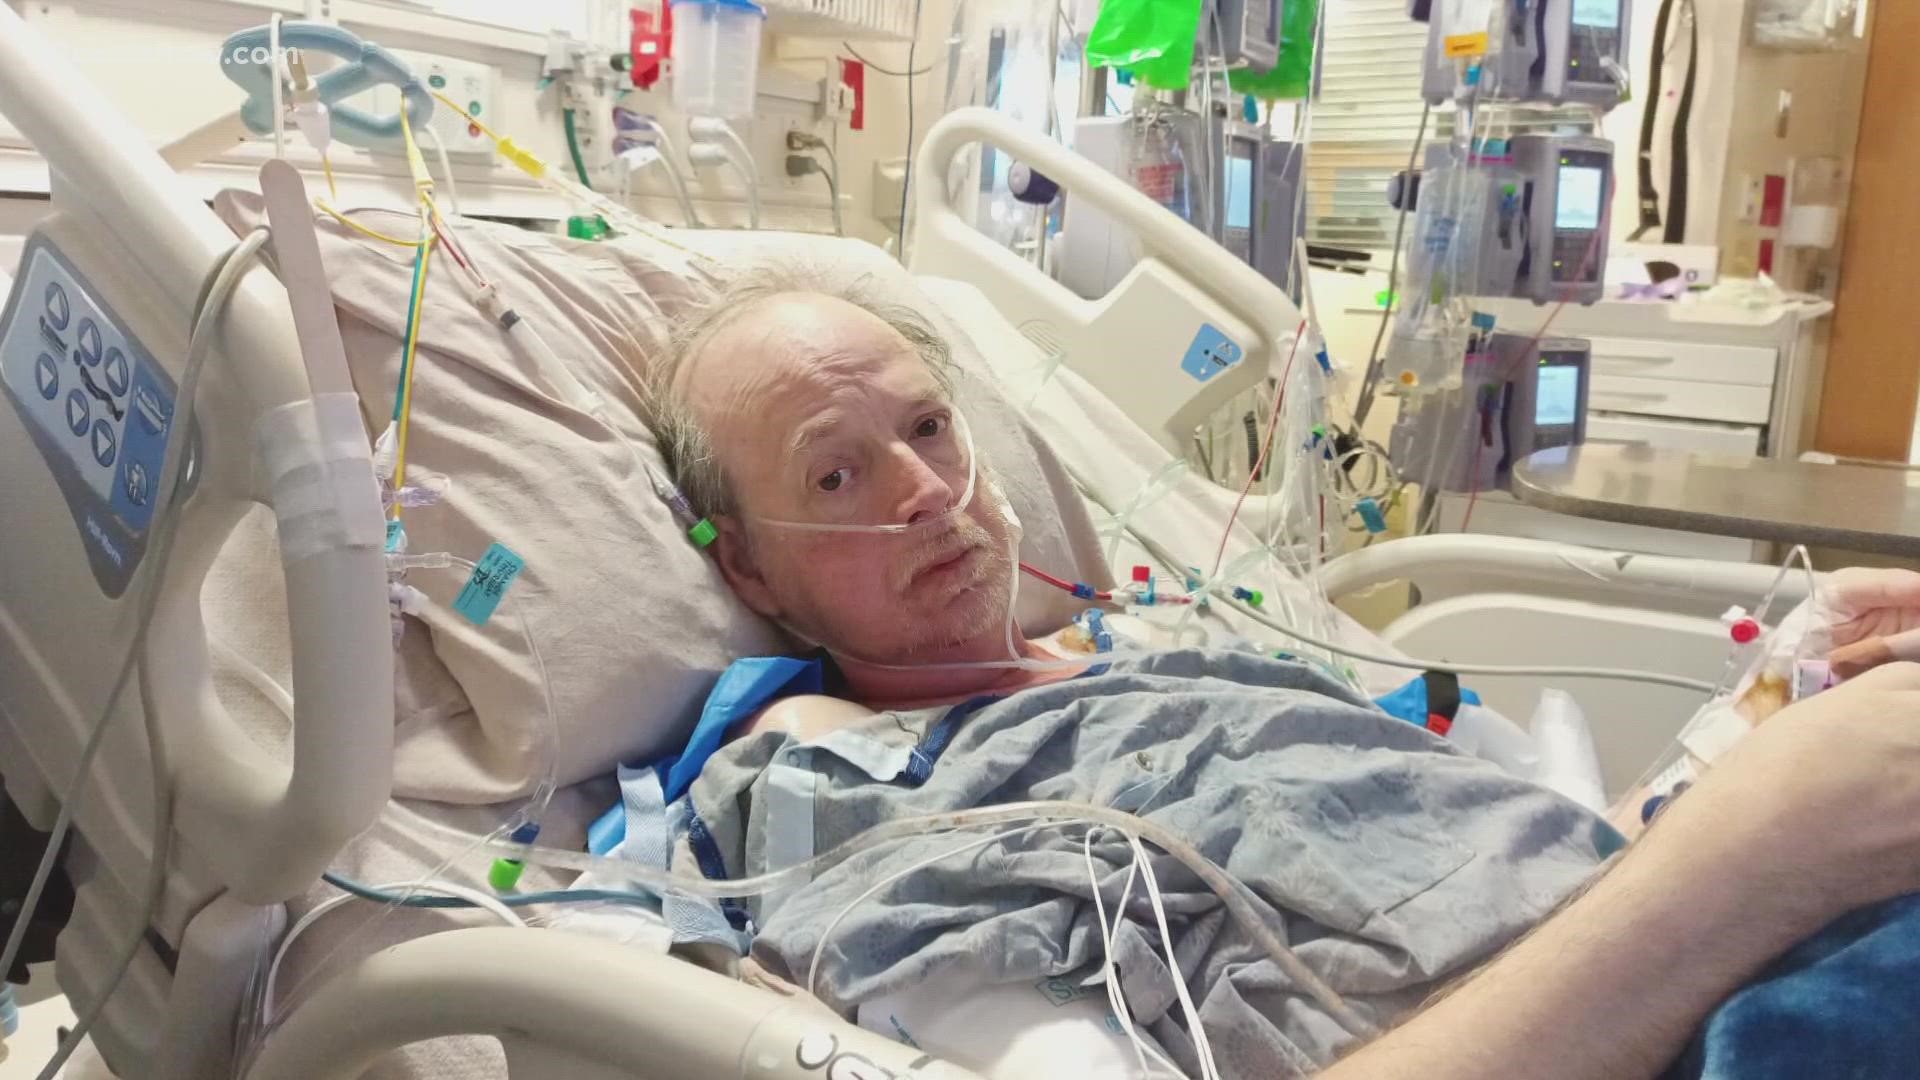 After a battle with throat cancer, which his doctors say was possibly caused by COVID, Johnathan Stanley thought he was in the clear. Then, another setback came.